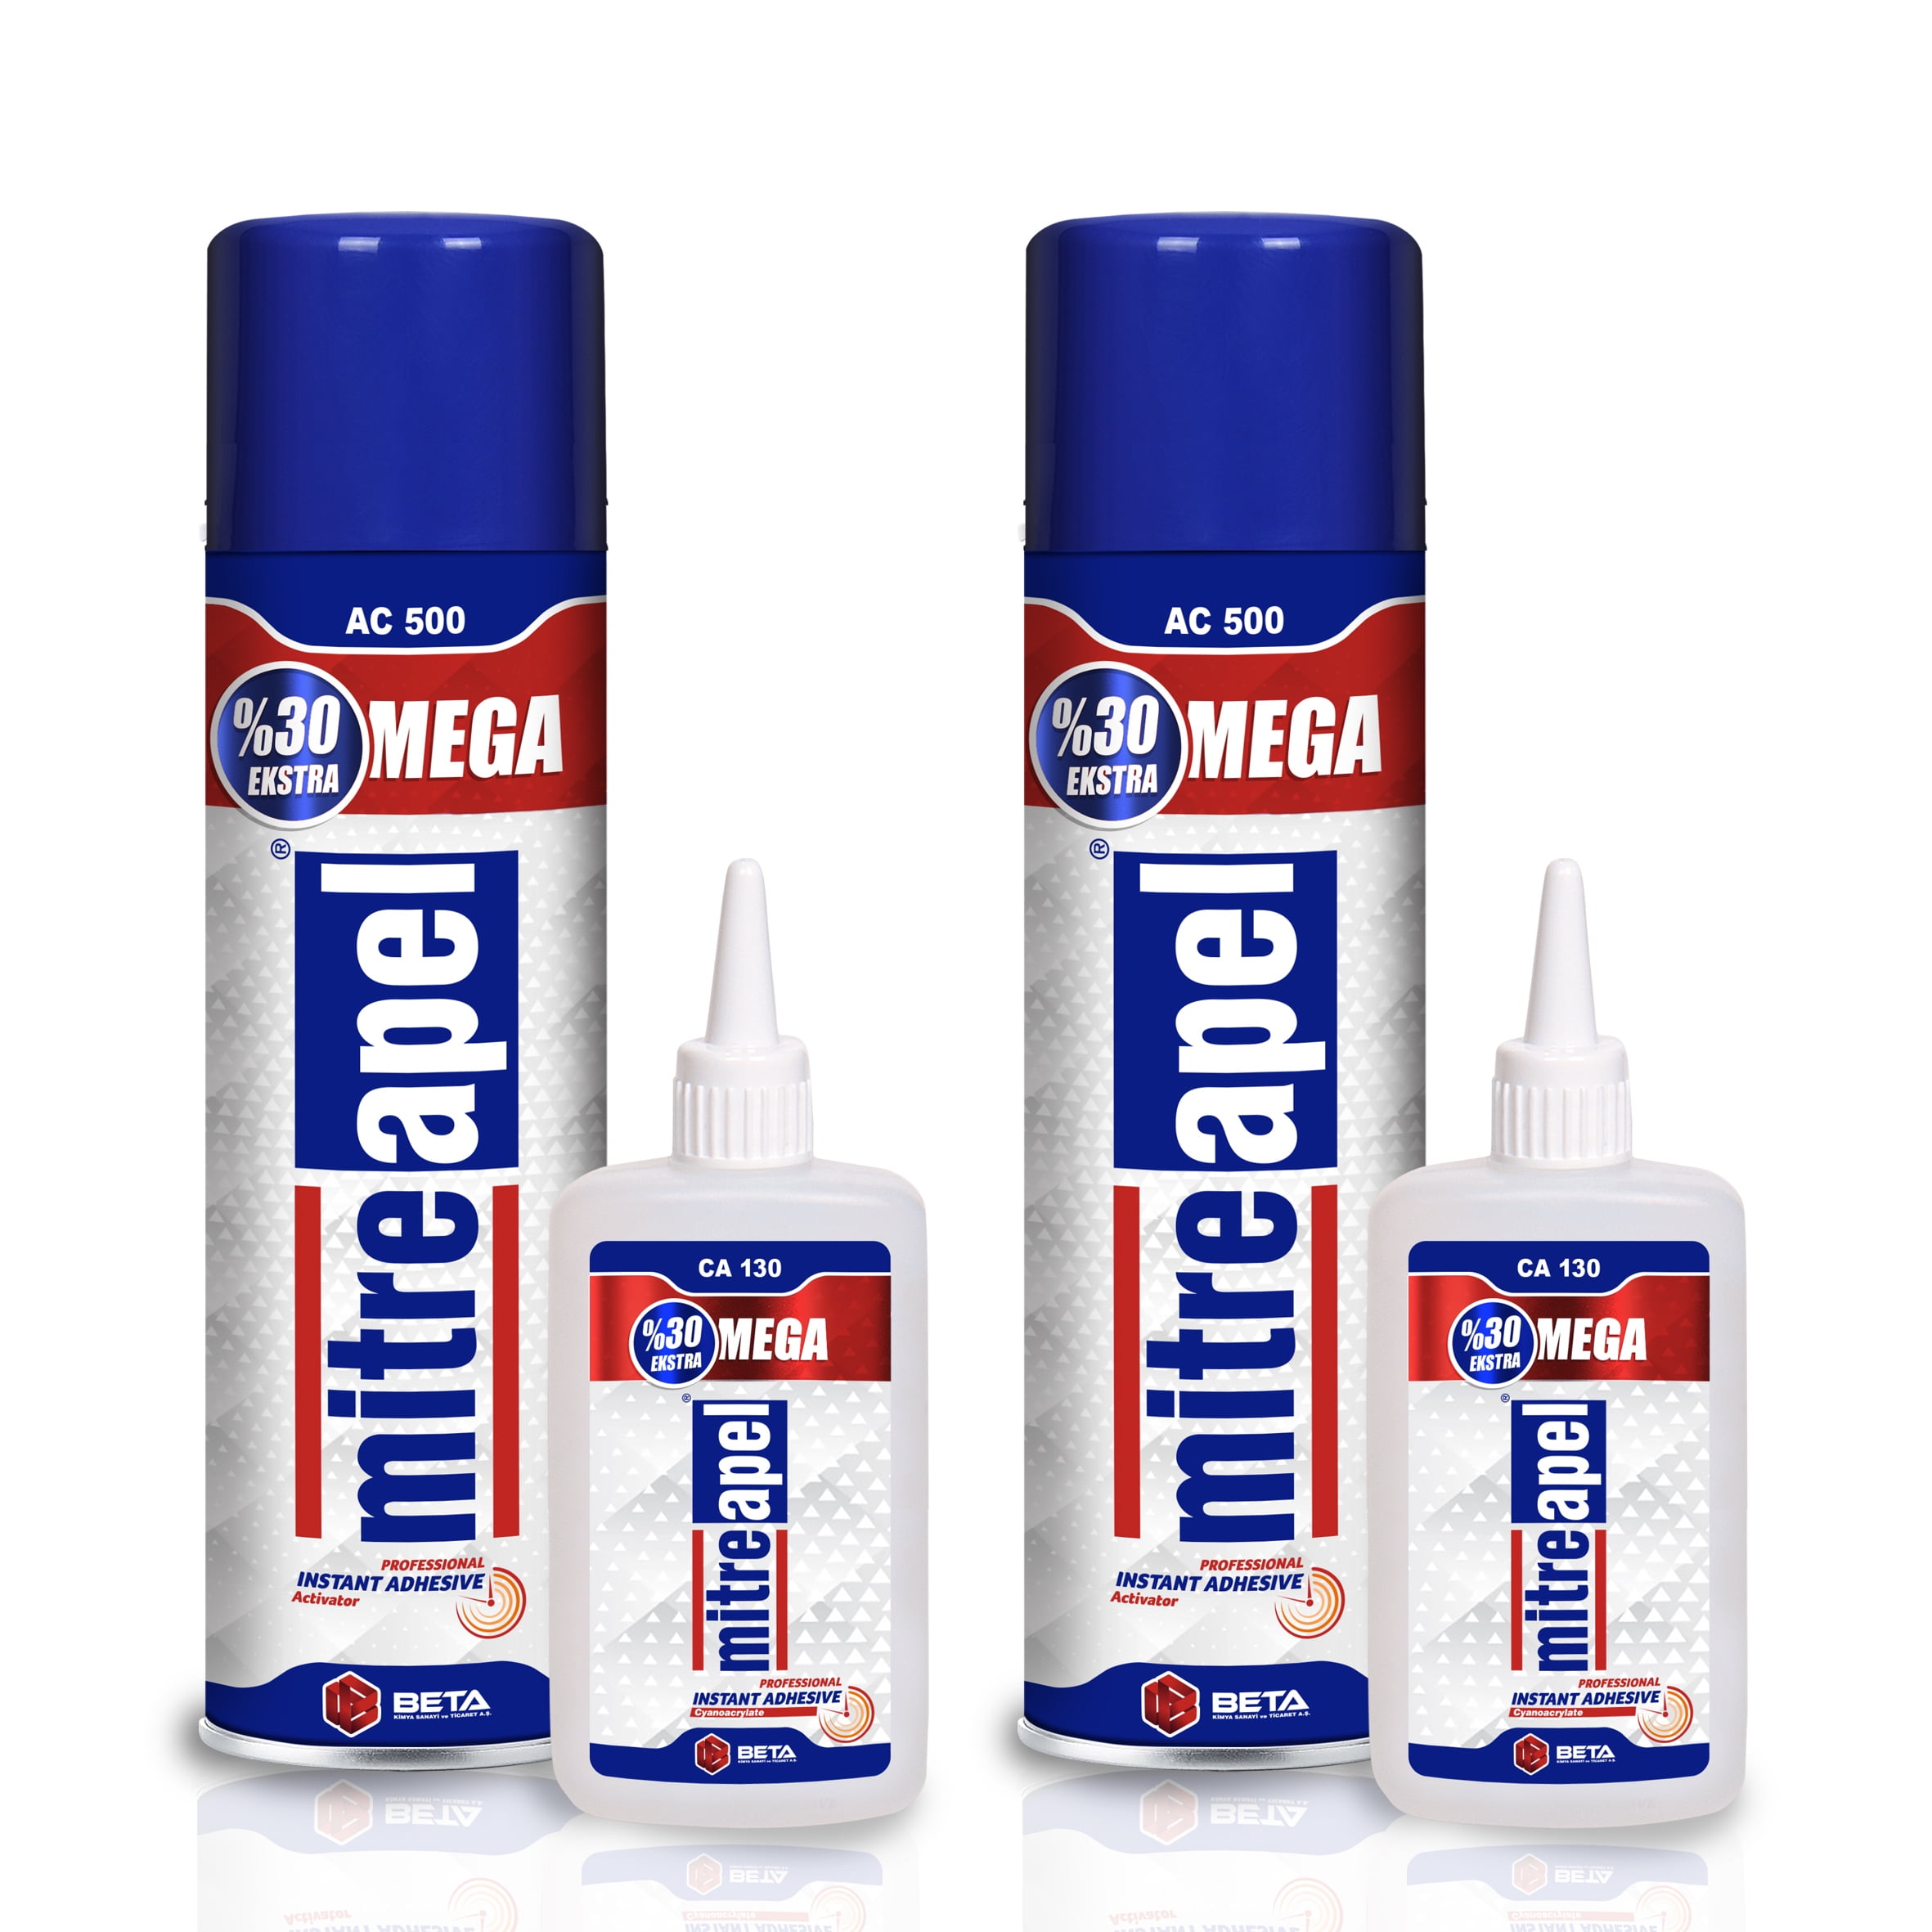 MITREAPEL Super CA Glue (2 x 0.80 oz) with Spray Adhesive Activator (2 x  3.30 fl oz) - Crazy Craft Glue for Wood, Plastic, Metal, Leather, Ceramic  for Sale in Tempe, AZ - OfferUp